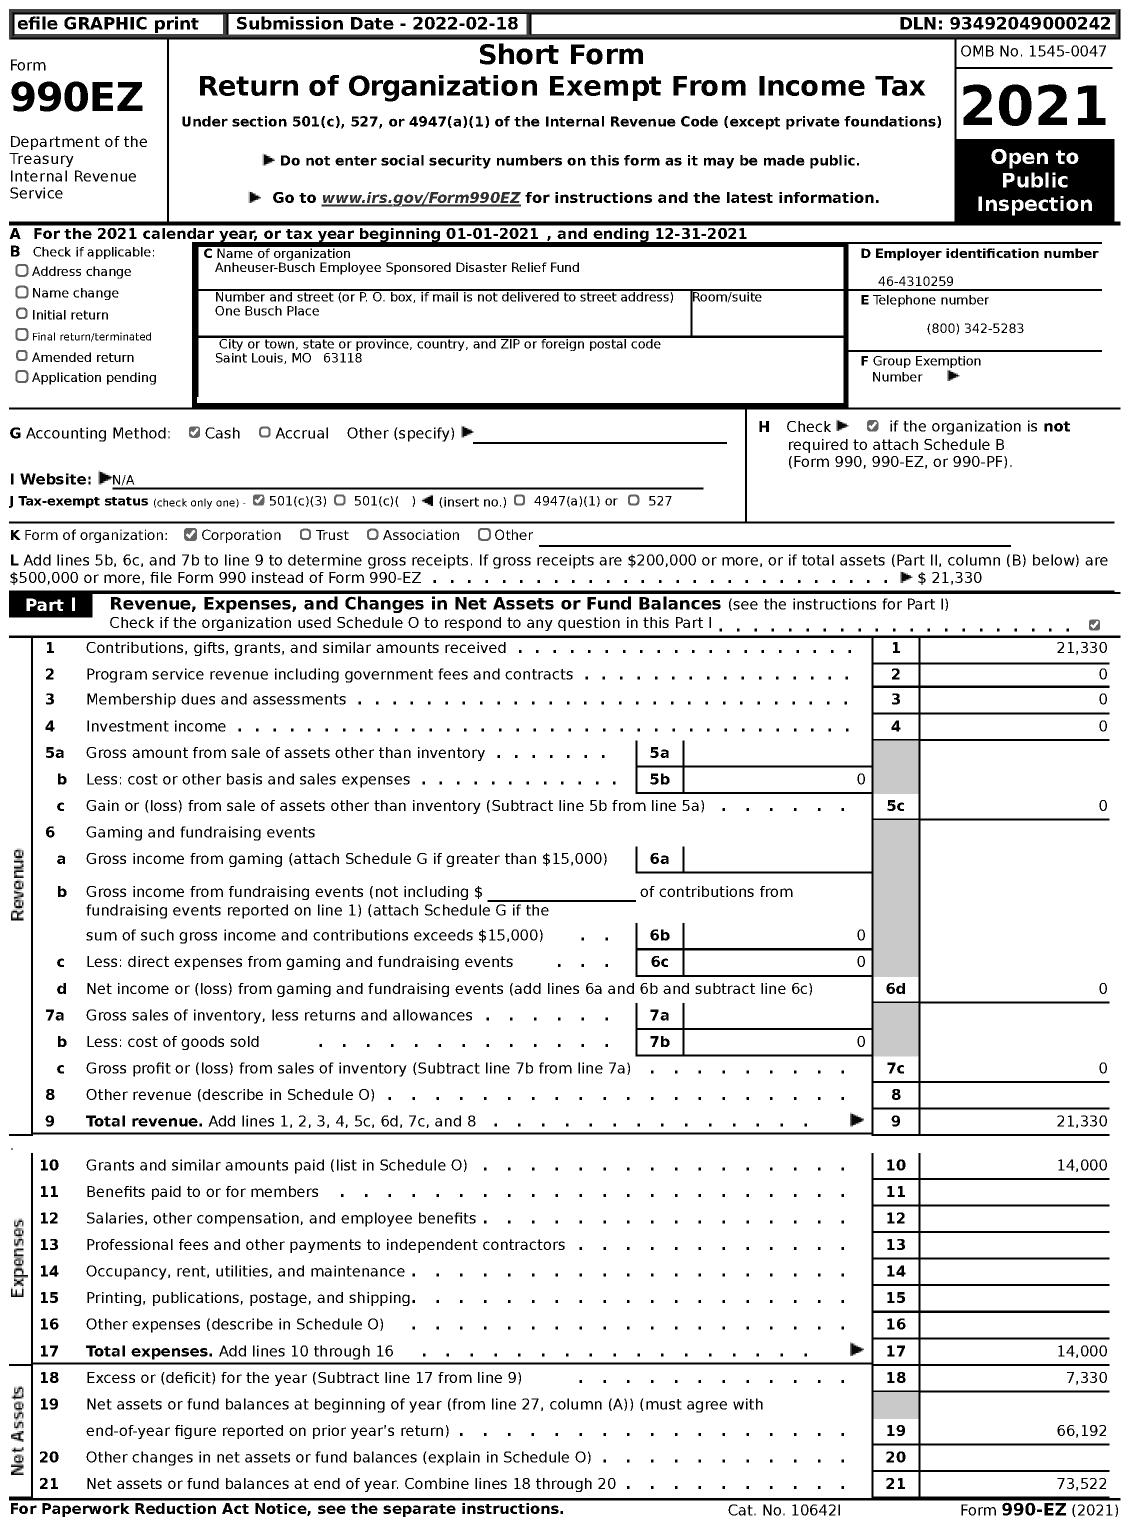 Image of first page of 2021 Form 990EZ for Anheuser-Busch Employee Sponsored Disaster Relief Fund